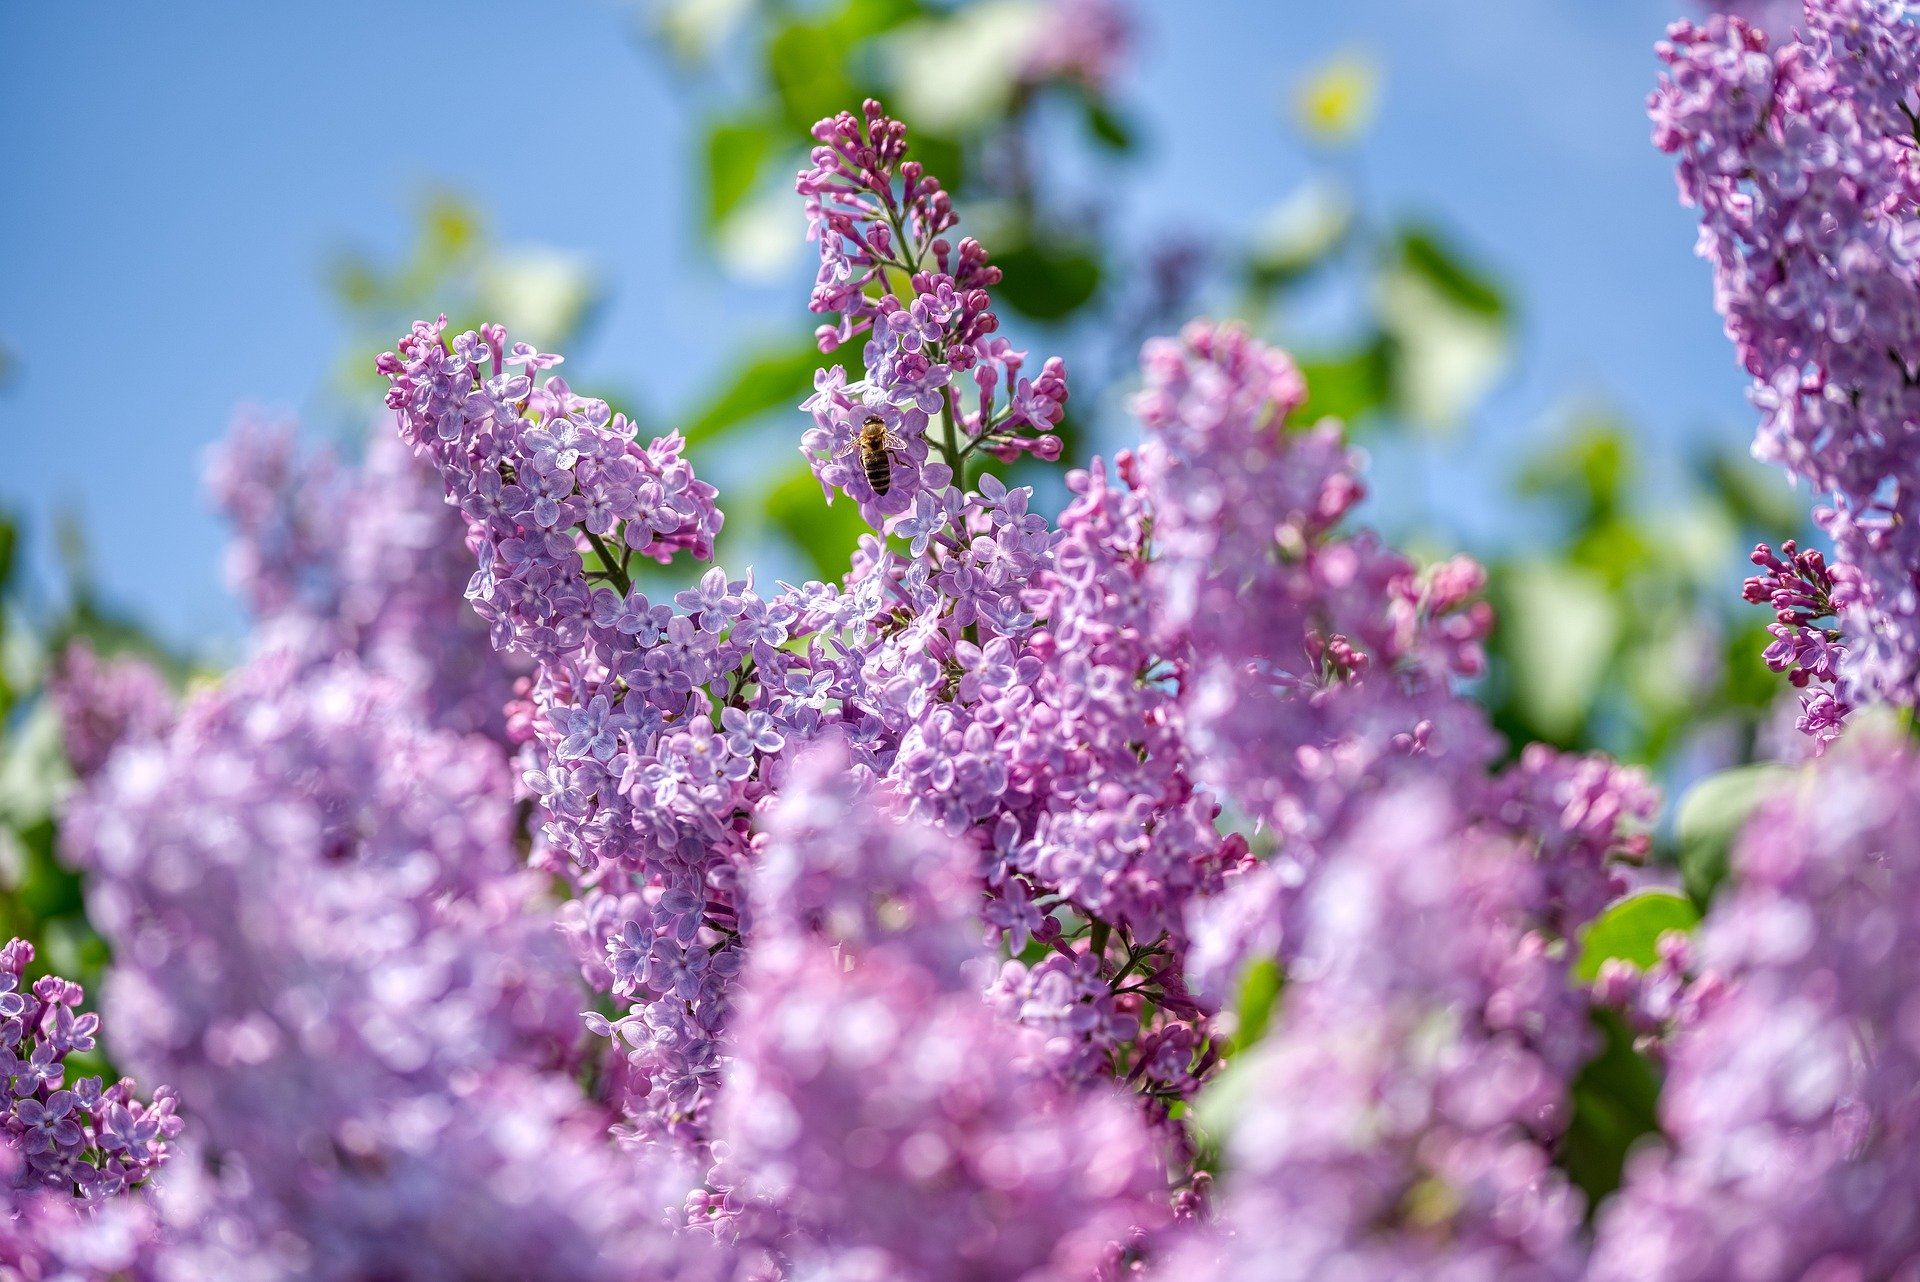 how to move your garden - splice lilac shoots